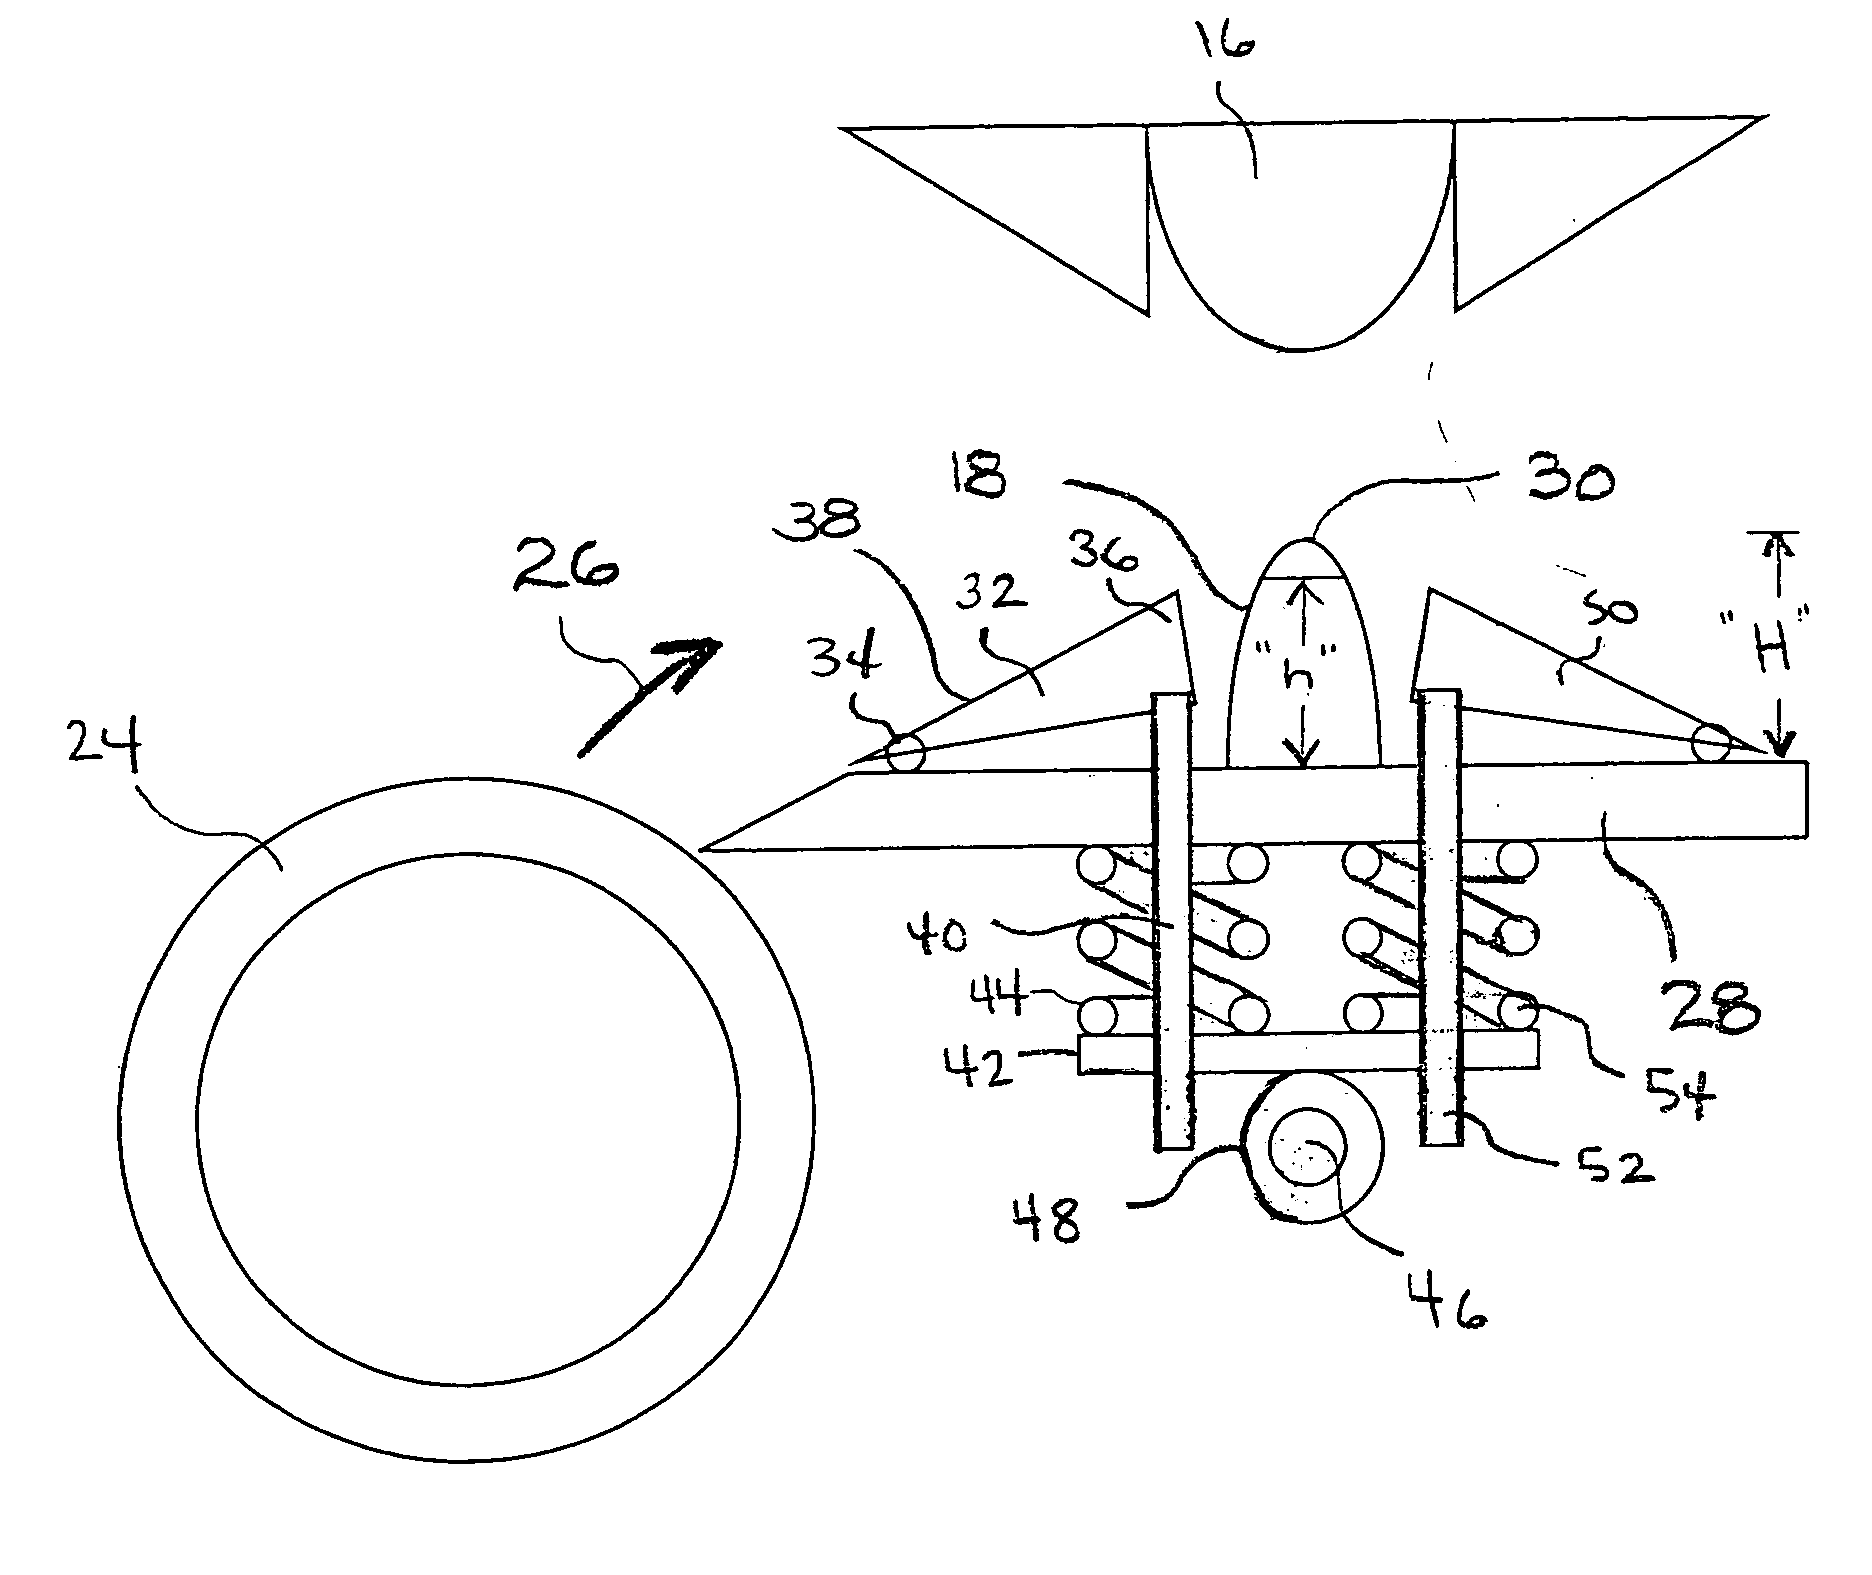 Adjustable flow guide to accommodate electrode erosion in a gas discharge laser